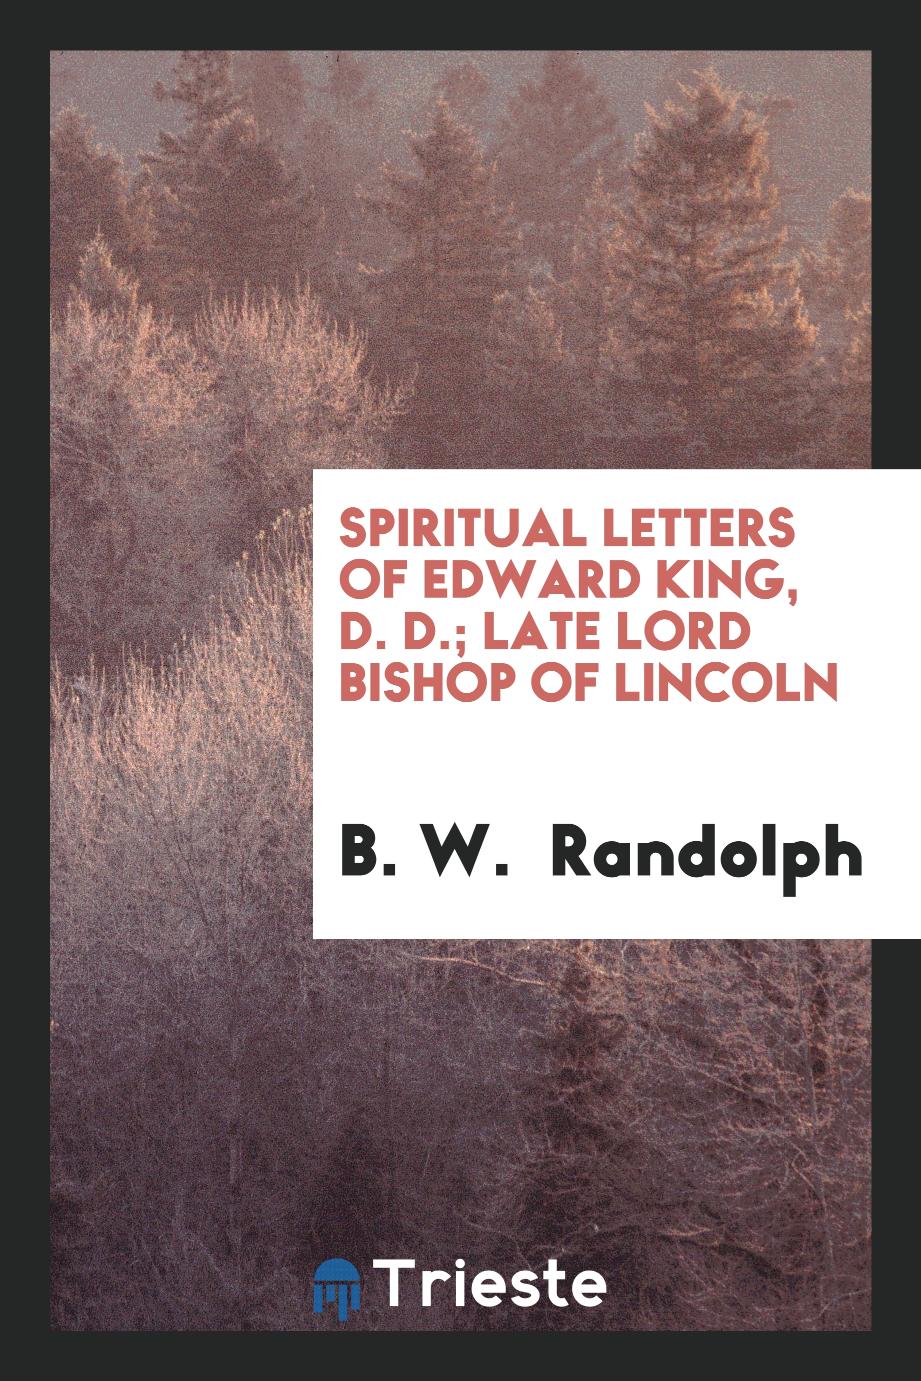 Spiritual letters of Edward King, D. D.; Late Lord Bishop of Lincoln